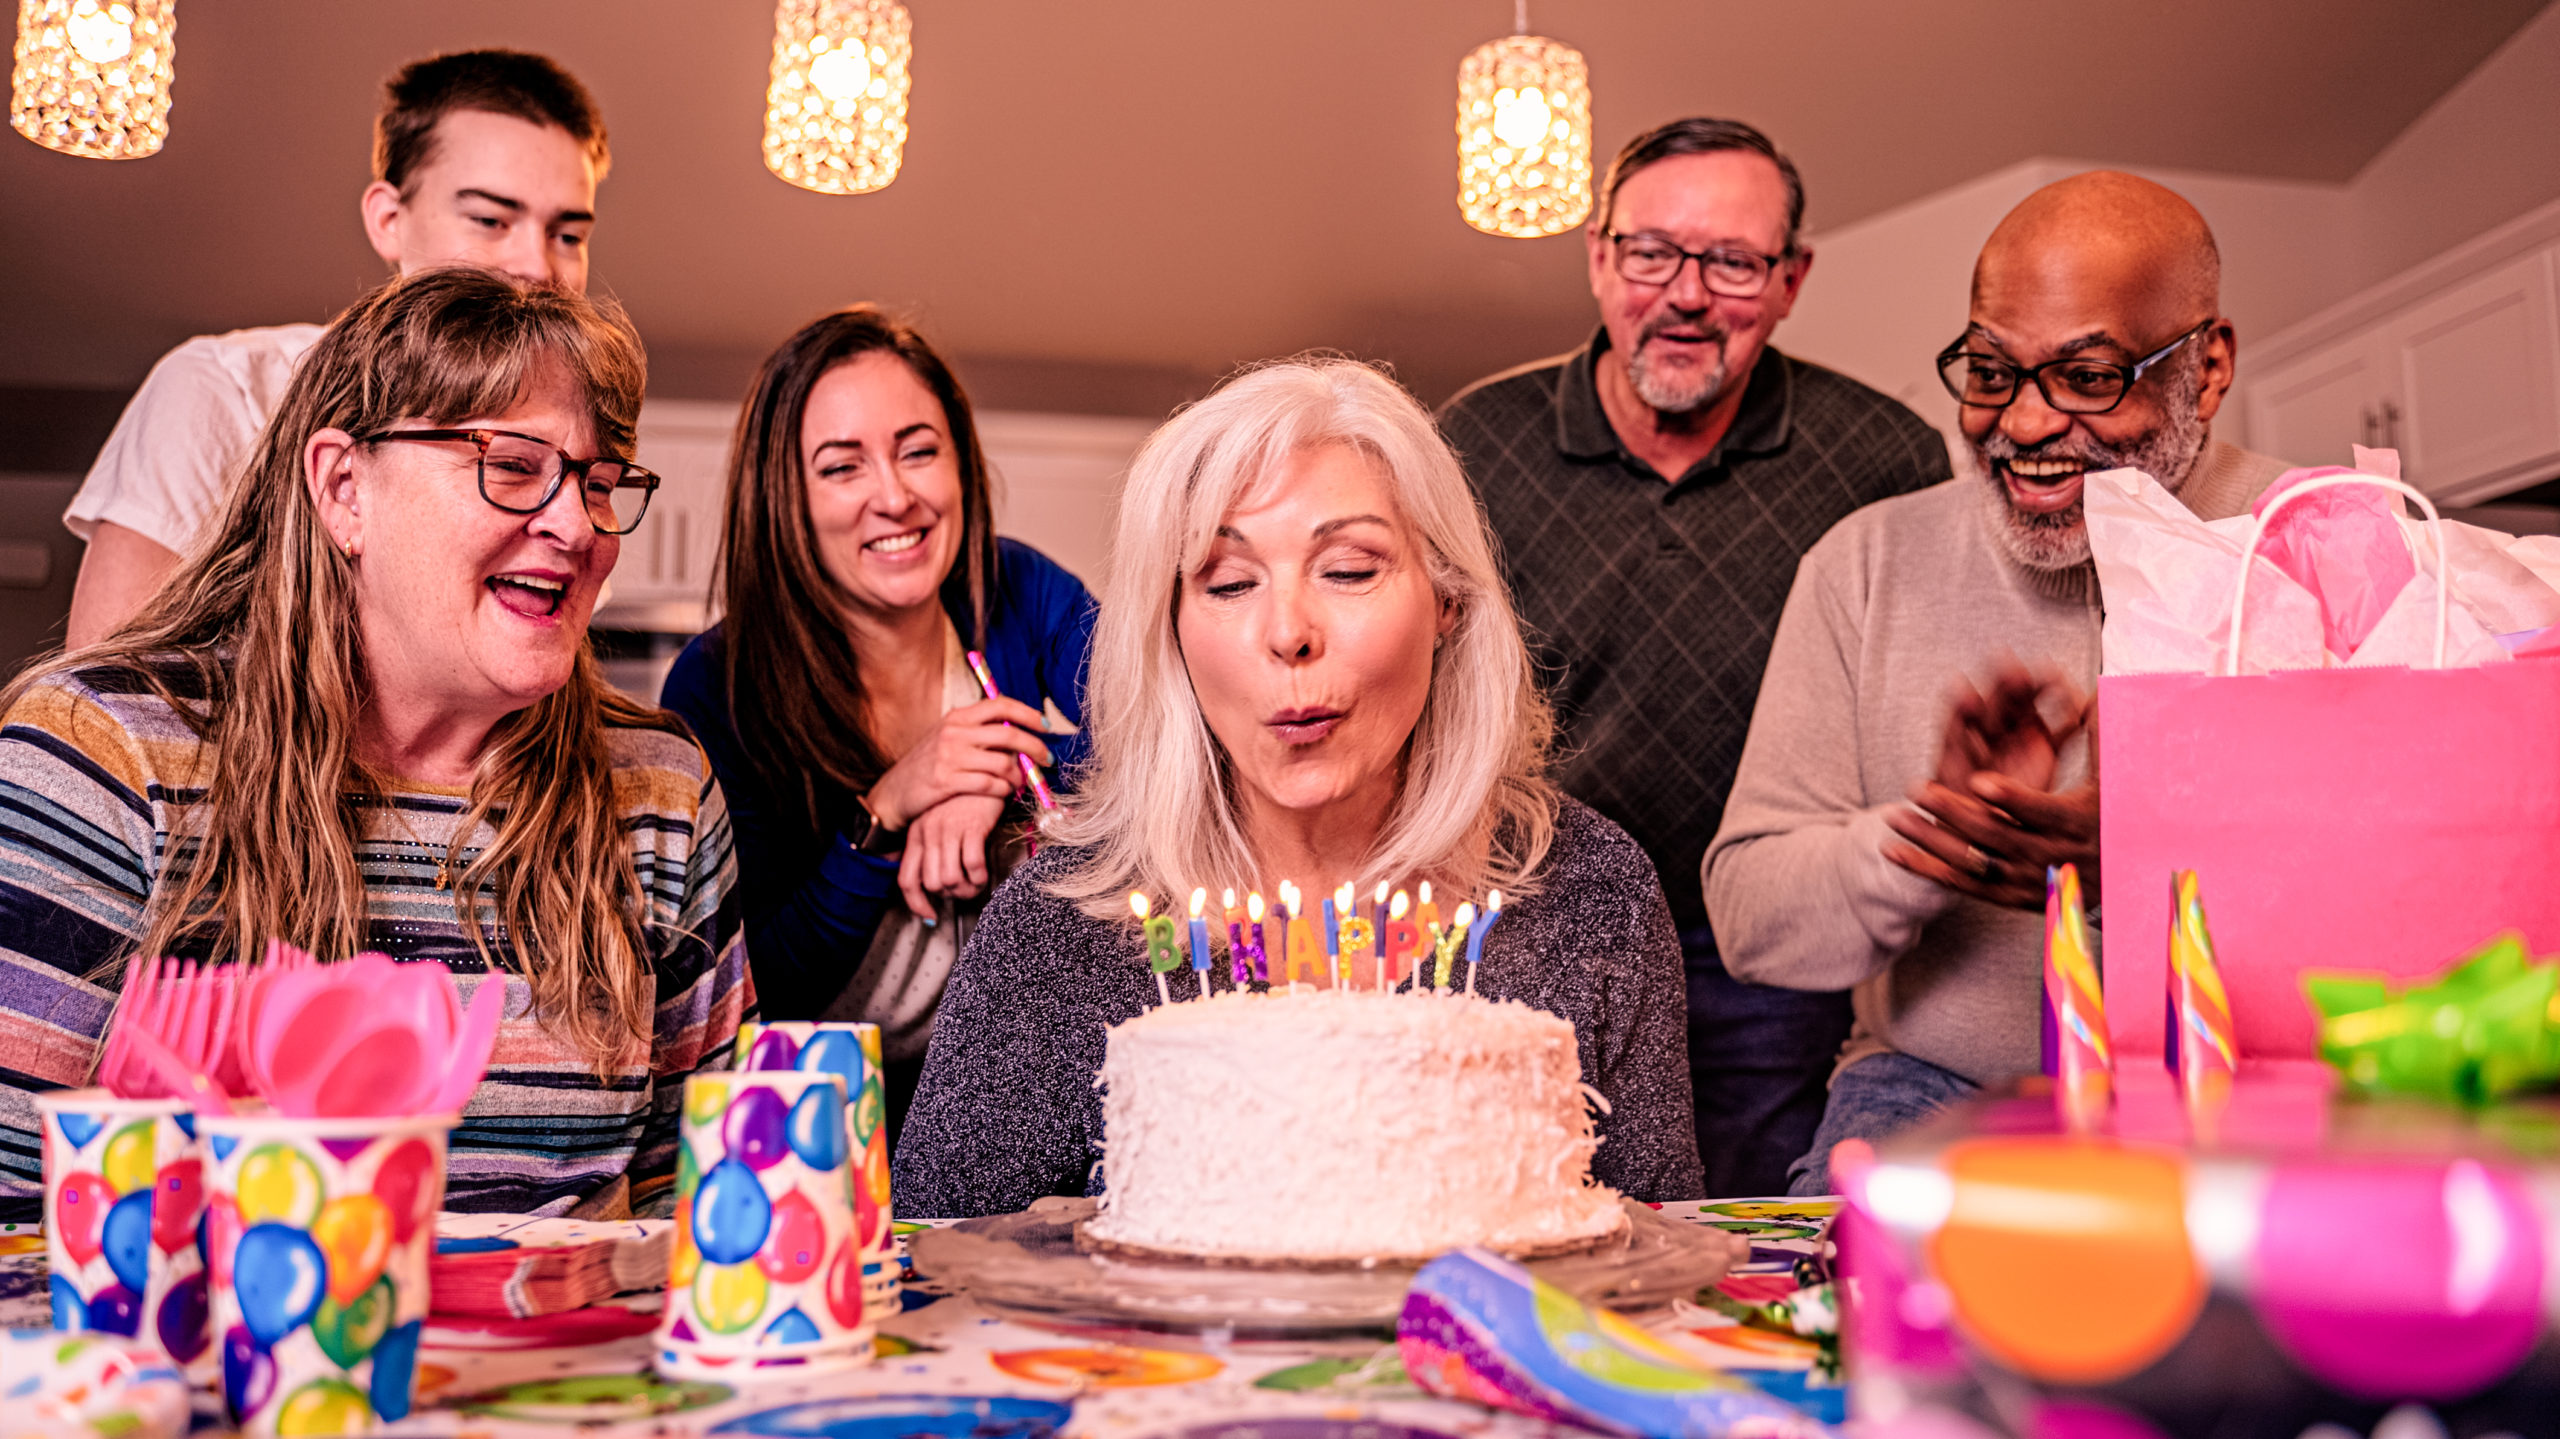 A grandma blowing out candles on her birthday with family